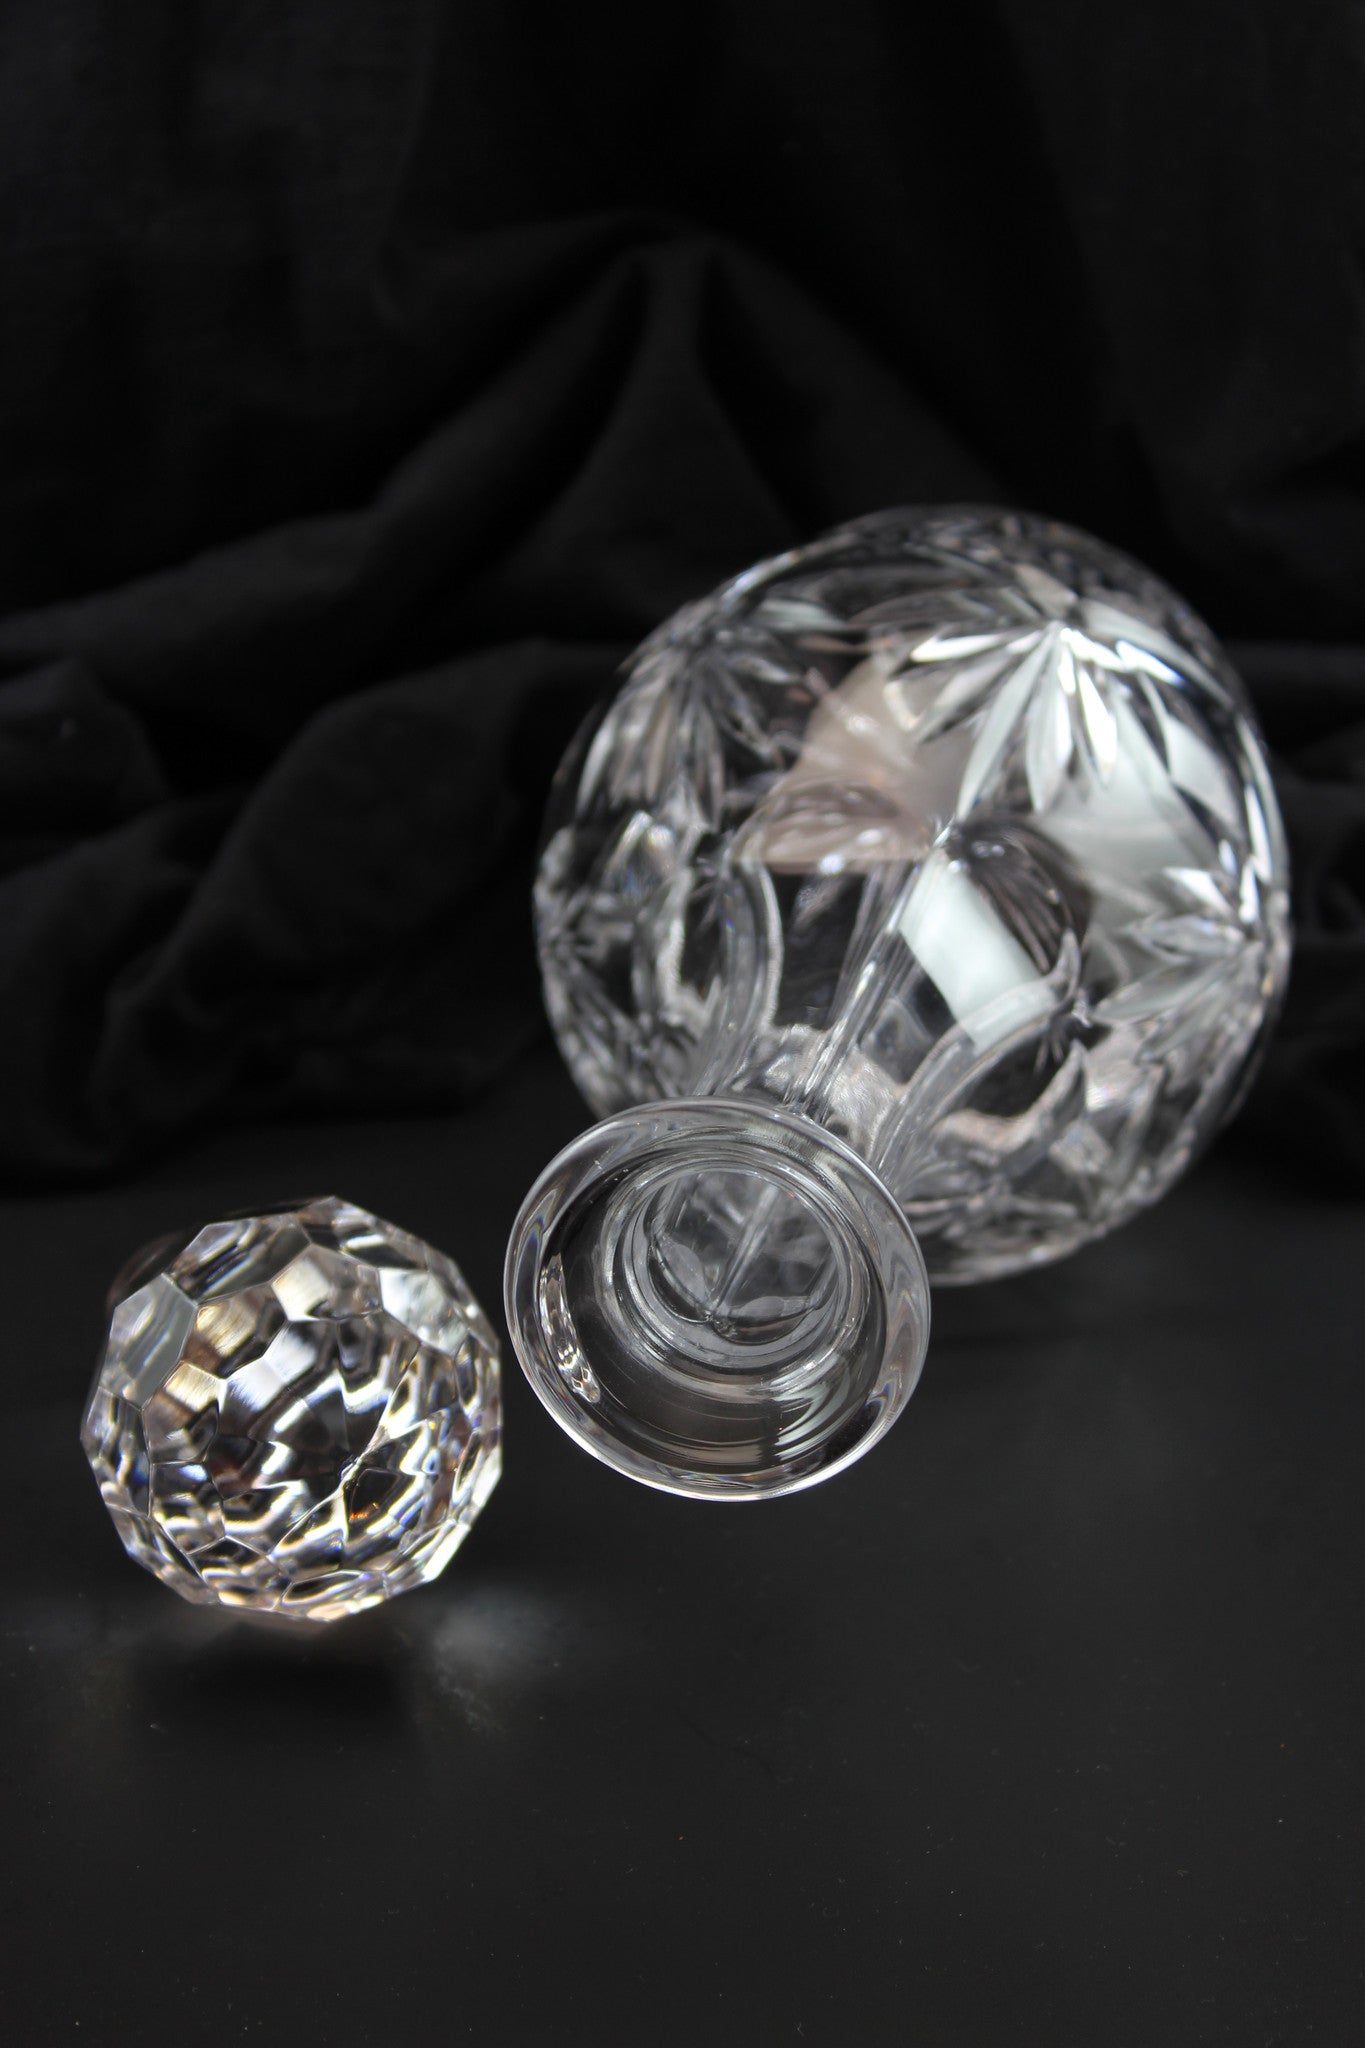 Vintage Lead Crystal Decanter with prism stopper